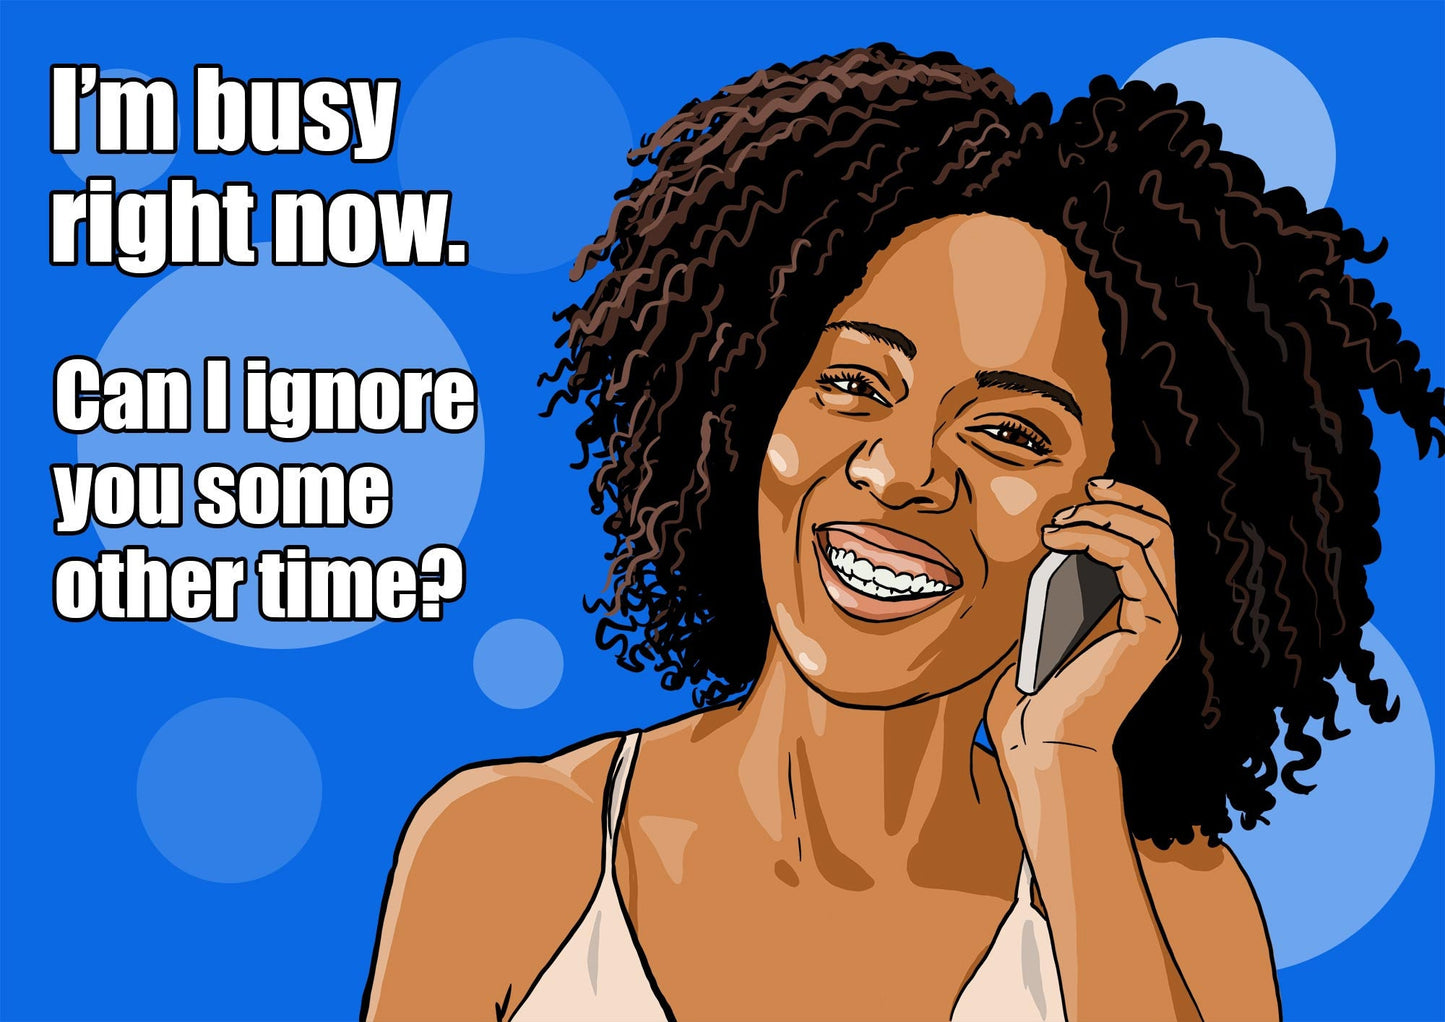 Funny postcard, set of 4, "I'm busy right now. Can I ignore you some other time?", humorous postcard, meme postcard, sarcastic postcard